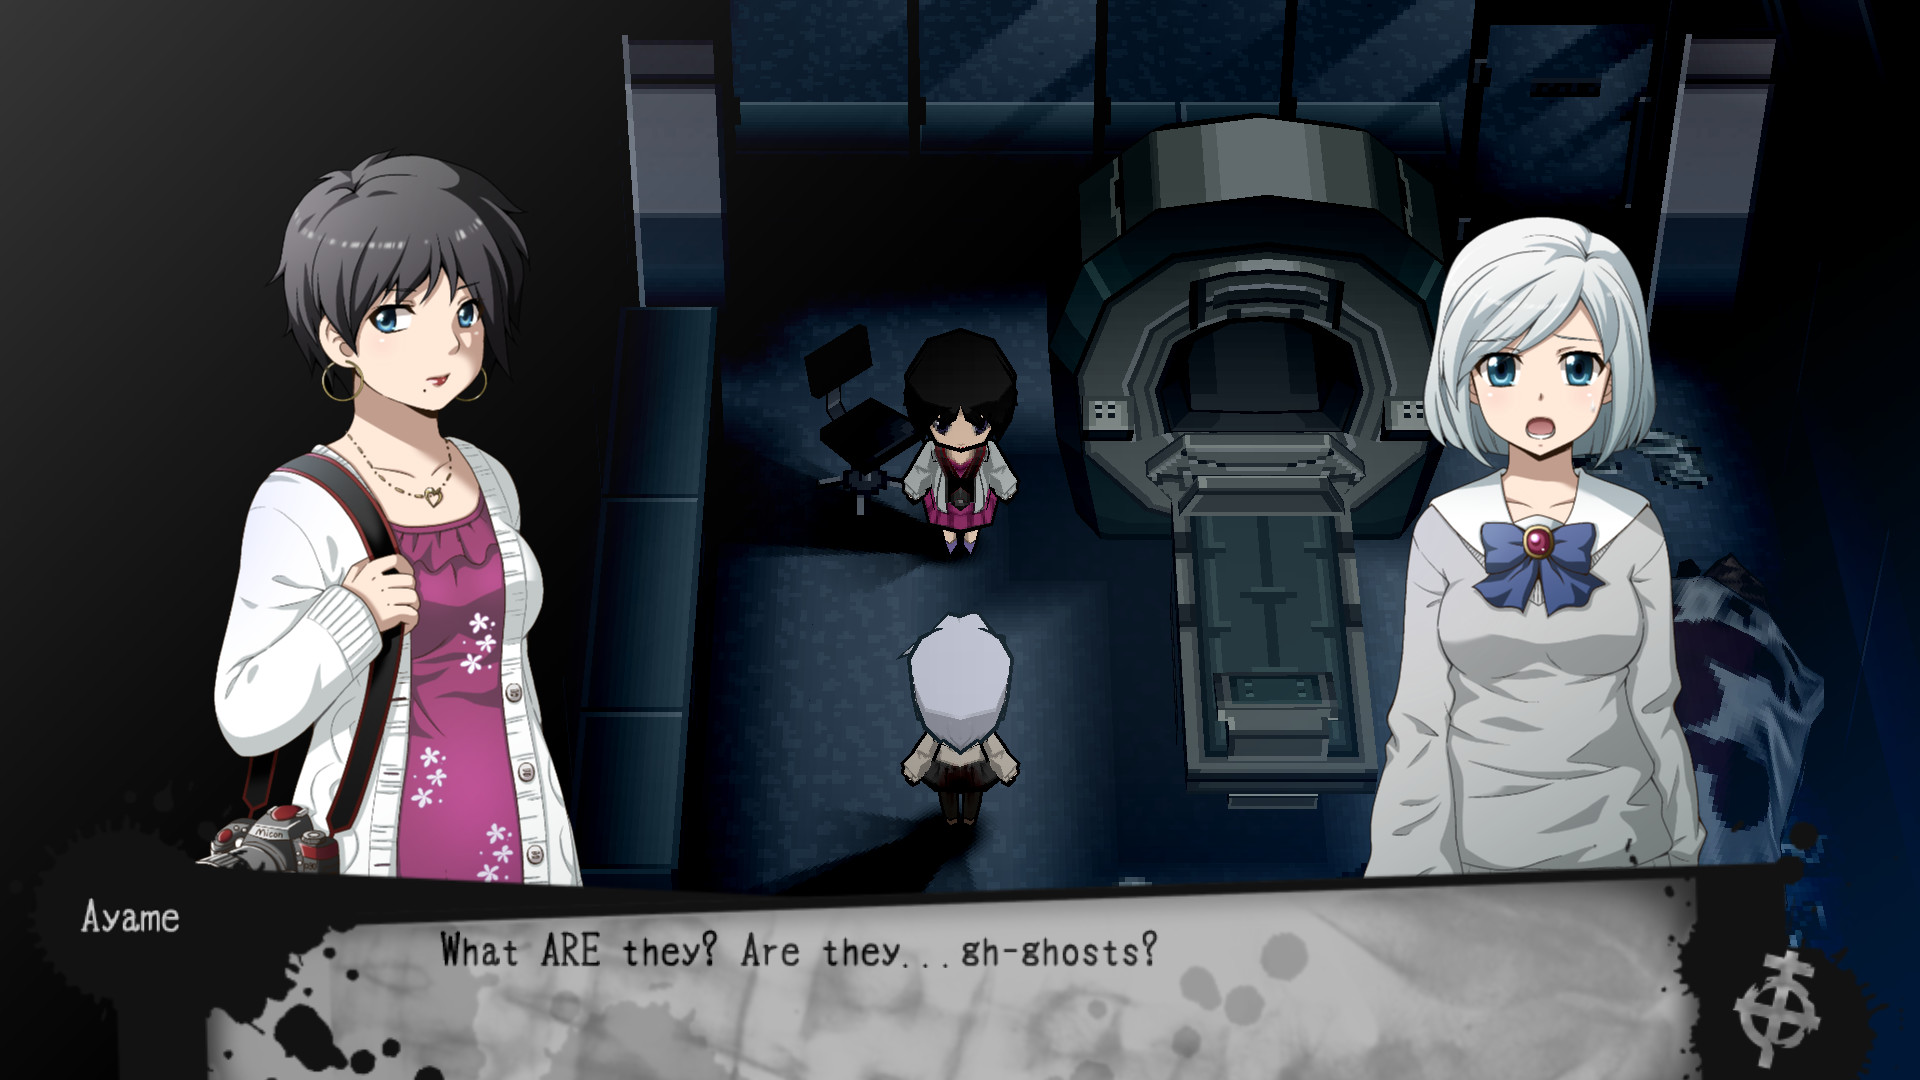 Save 20% on Corpse Party 2: Dead Patient on Steam